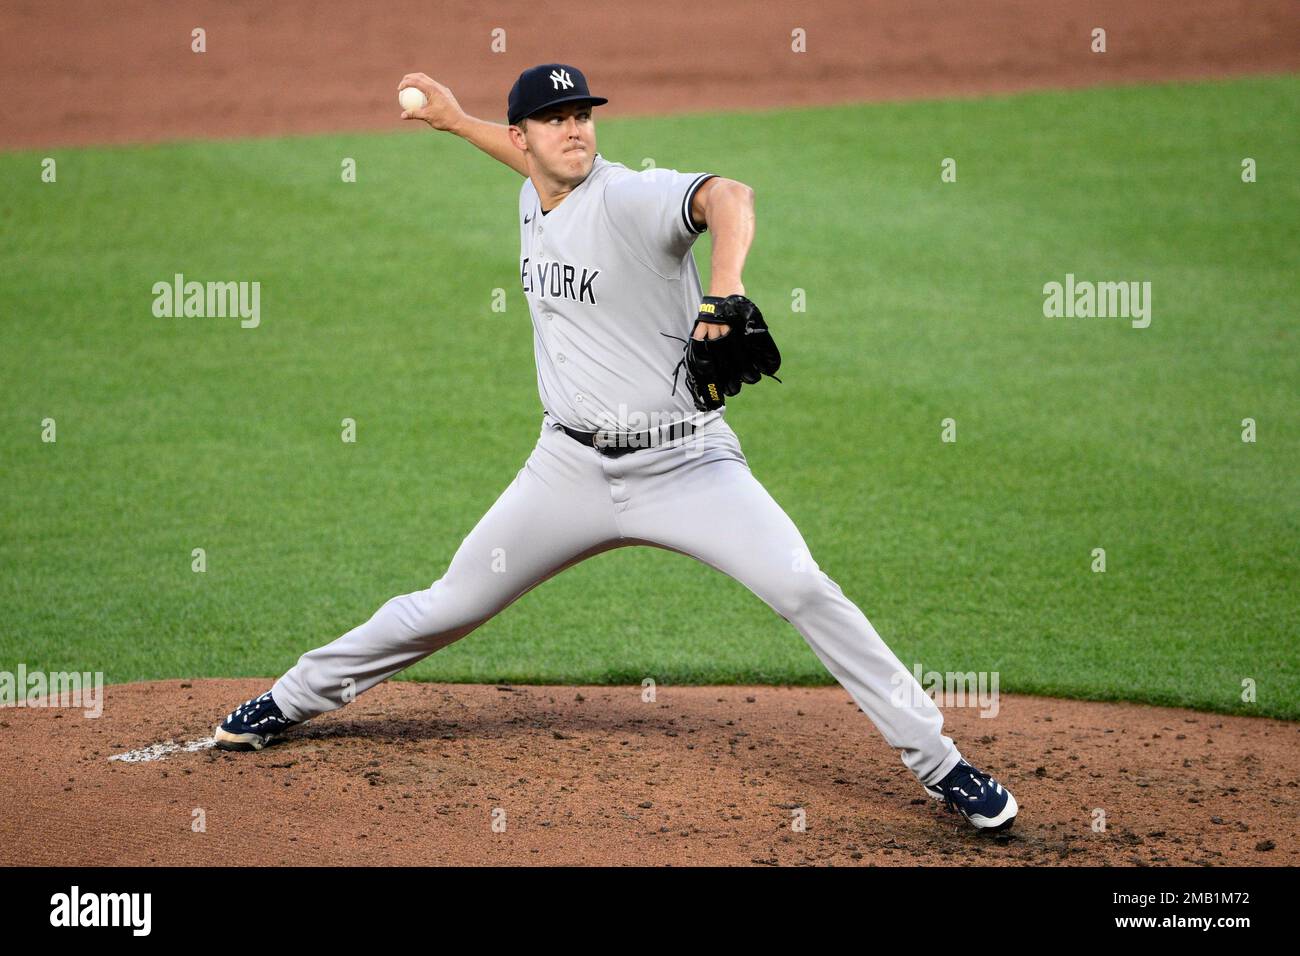 New York Yankees starting pitcher Jameson Taillon (50) in action